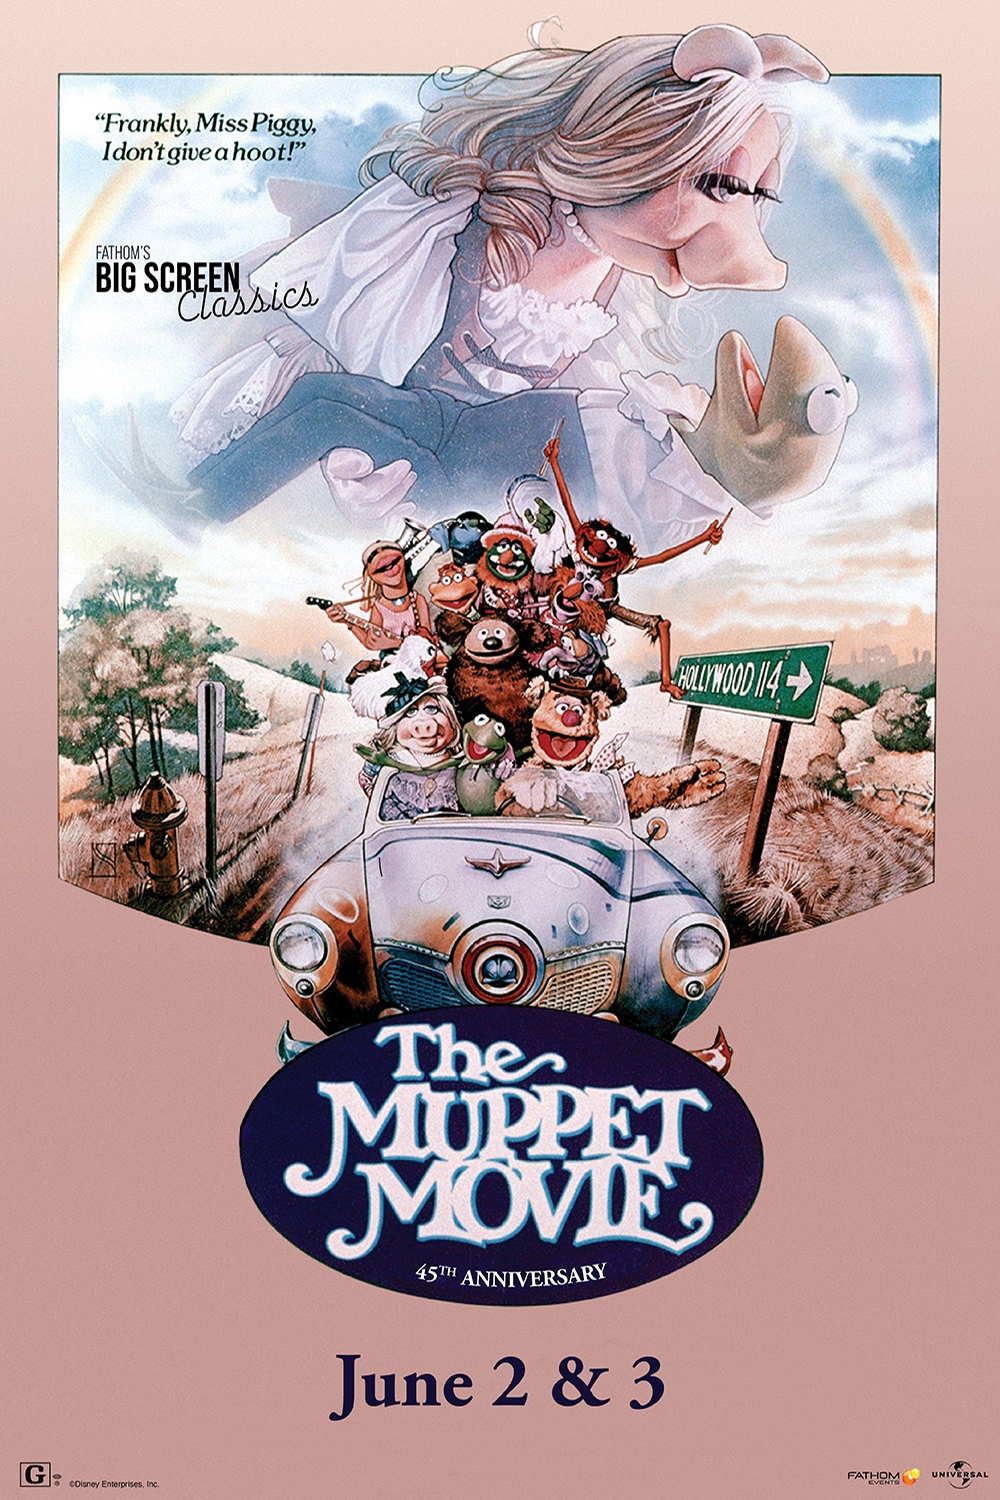 Poster of The Muppet Movie 45th Anniversary